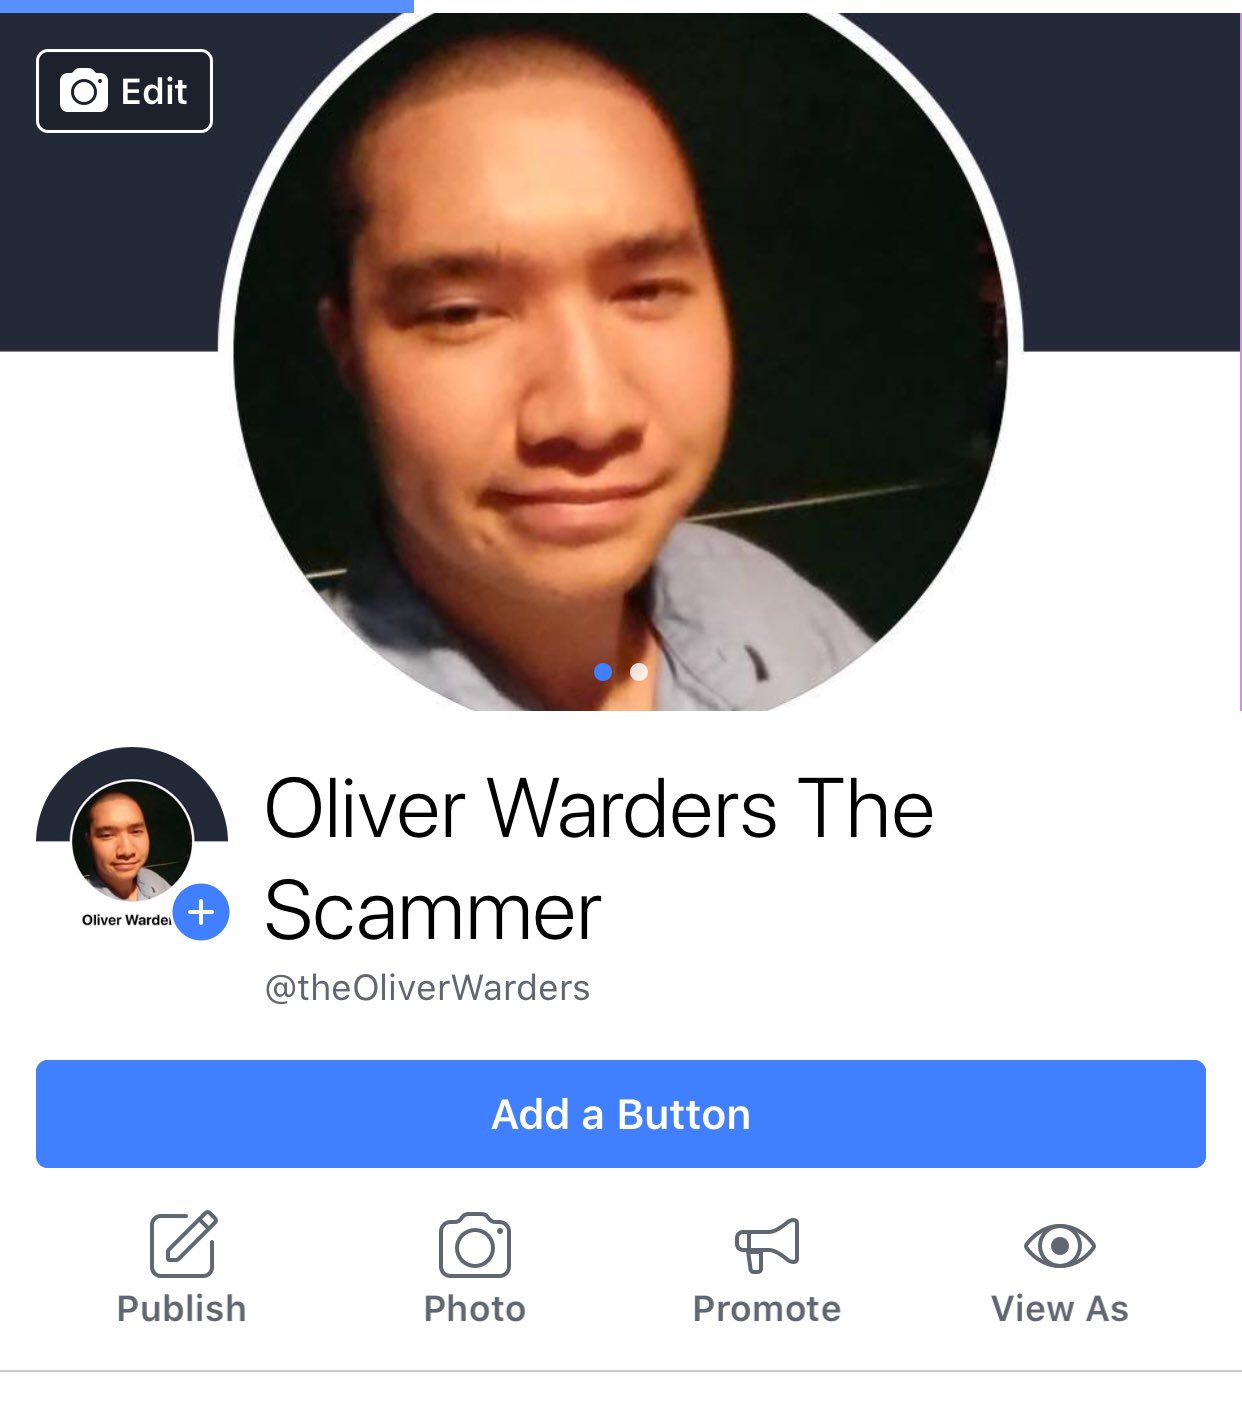 OLIVER WARDERS THE SCAMMER